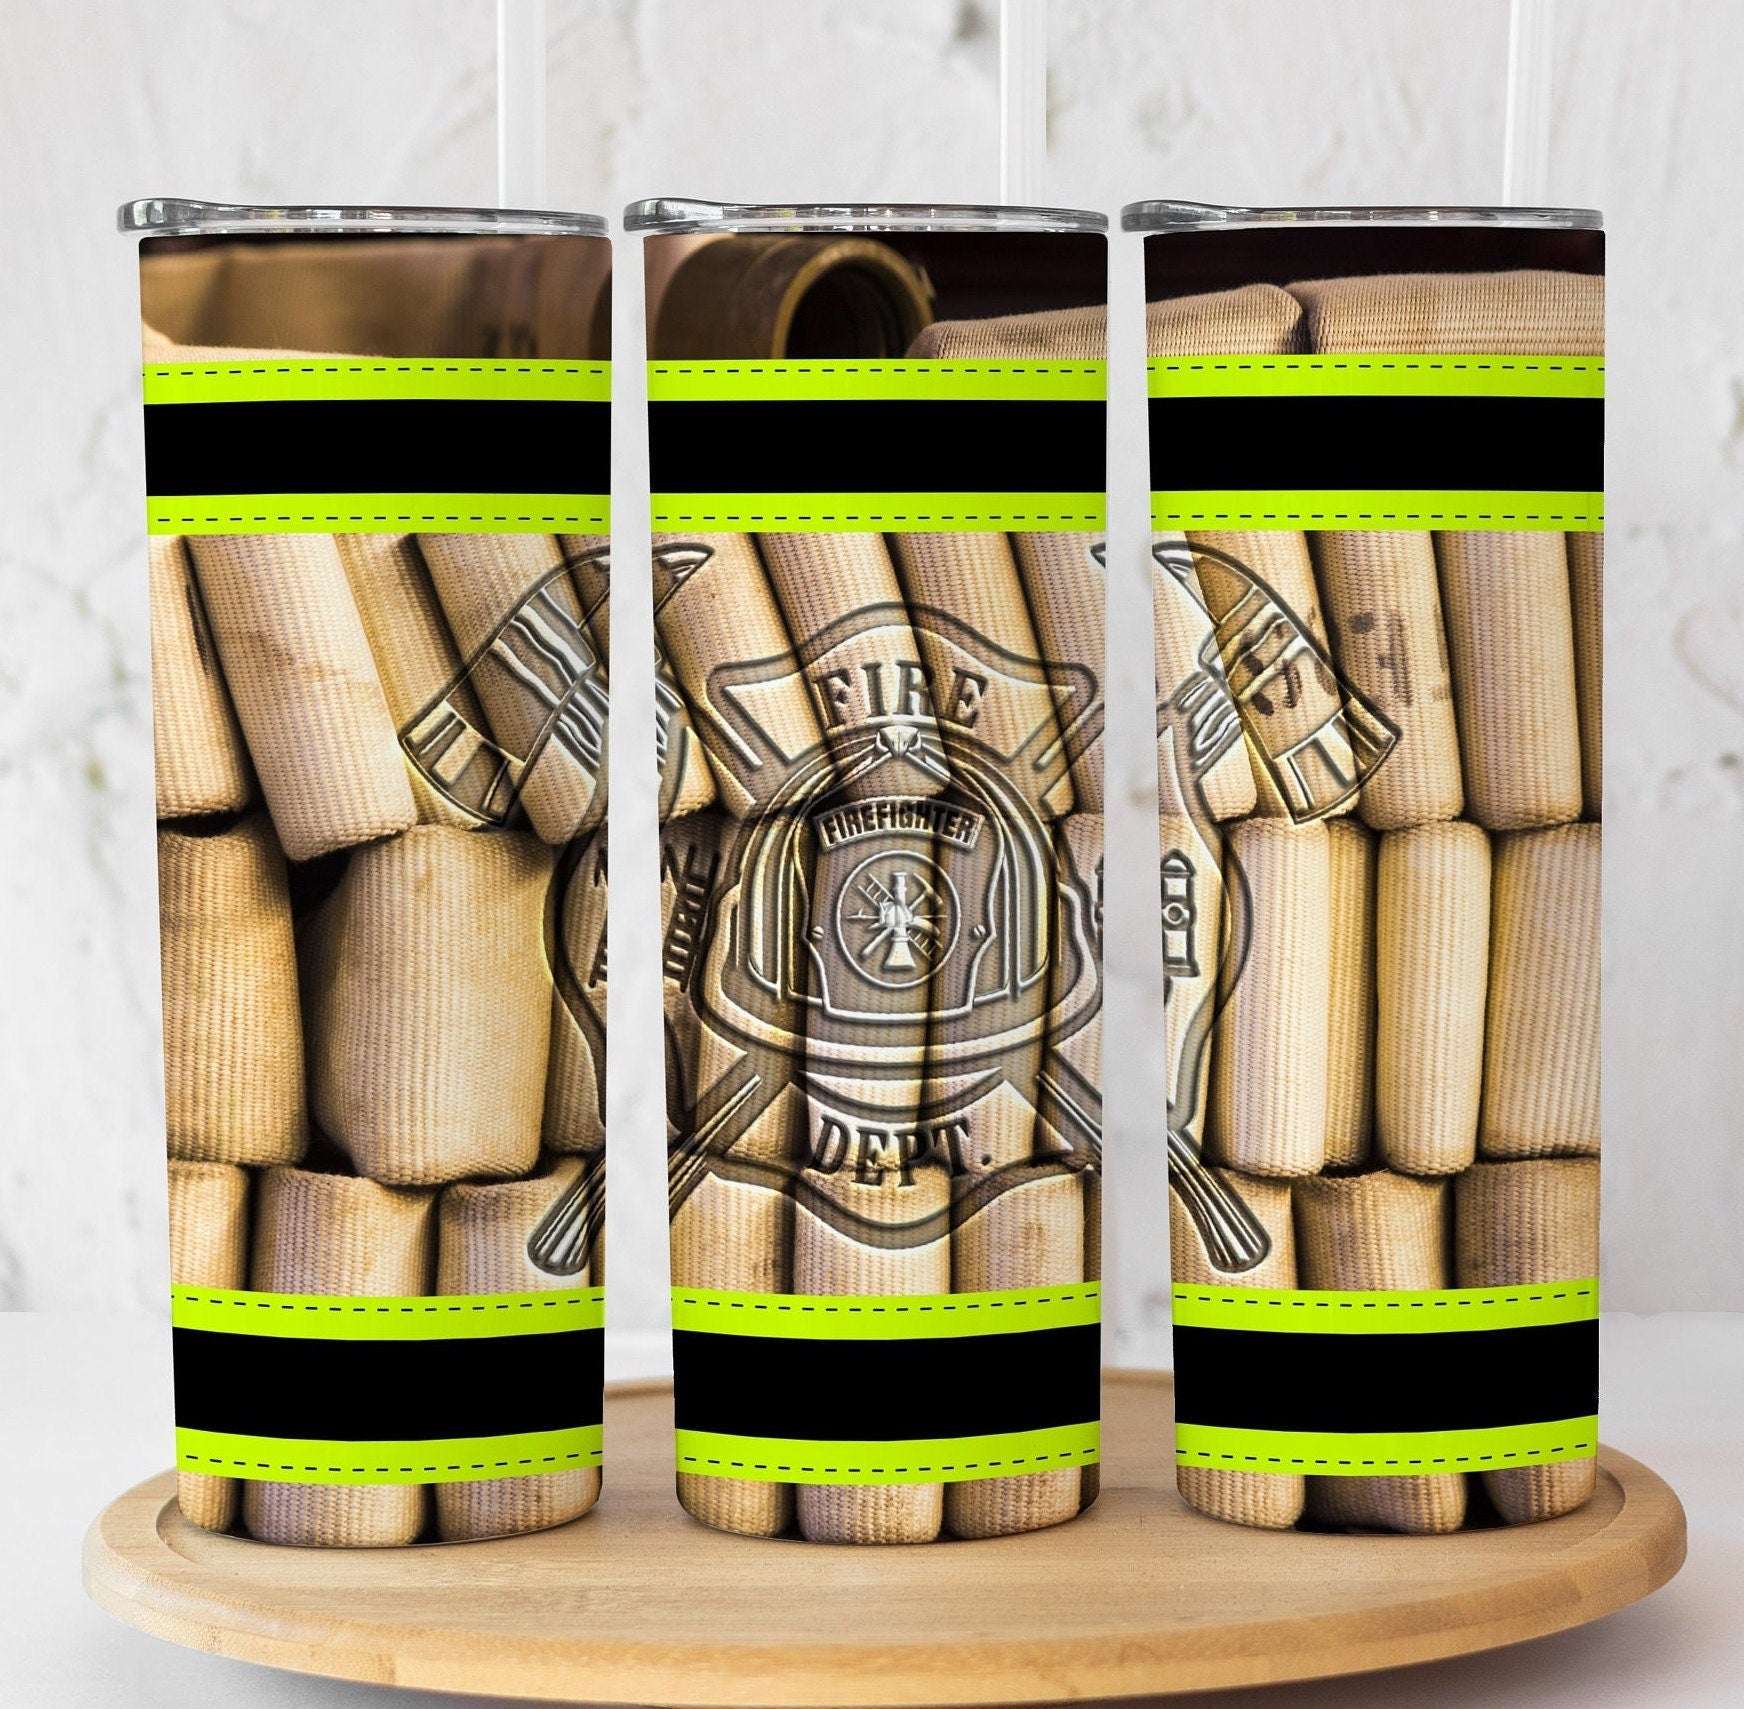 Fire Dept. Fire Hose Tumbler, Personalized Firefighter Tumbler, Firefighter Gift, Firefighter Graduation Gift